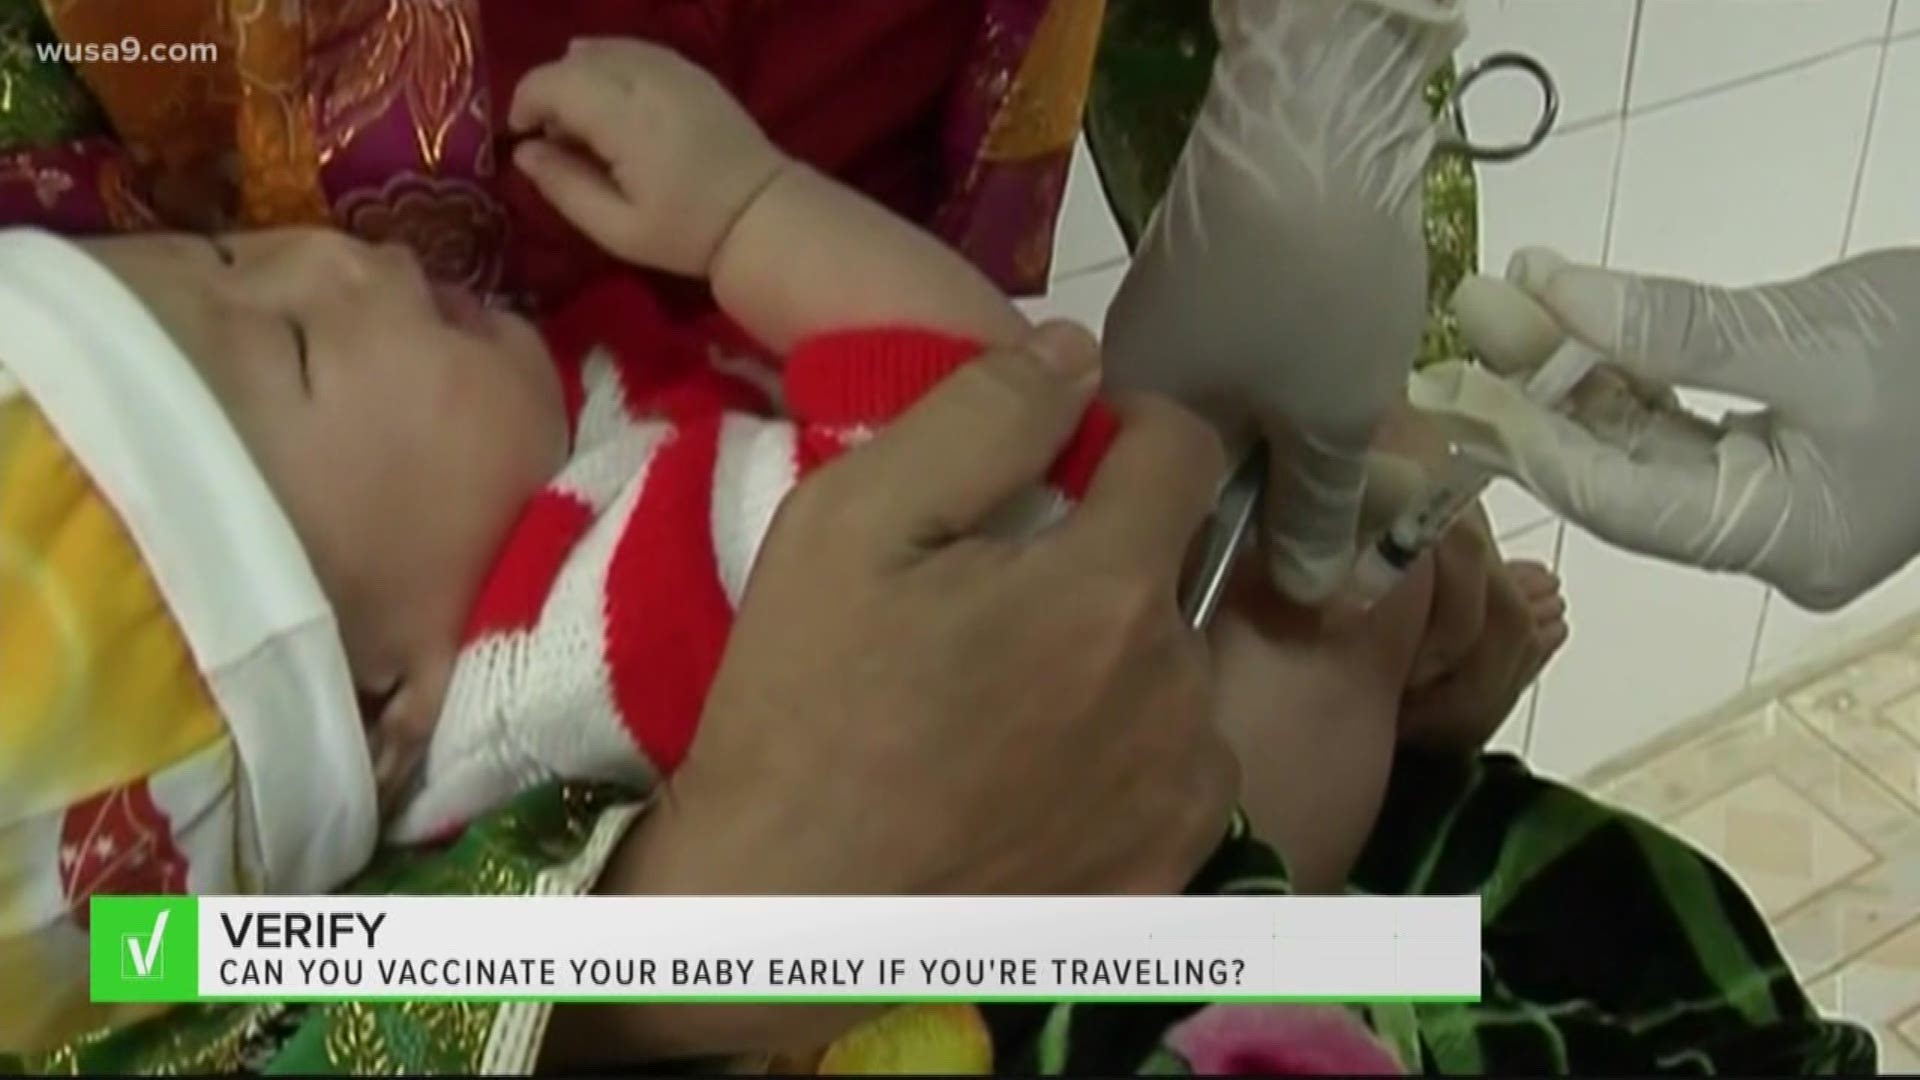 Health experts advise to limit traveling with vaccinated infants, especially overseas, where some countries are facing large-scale outbreaks.